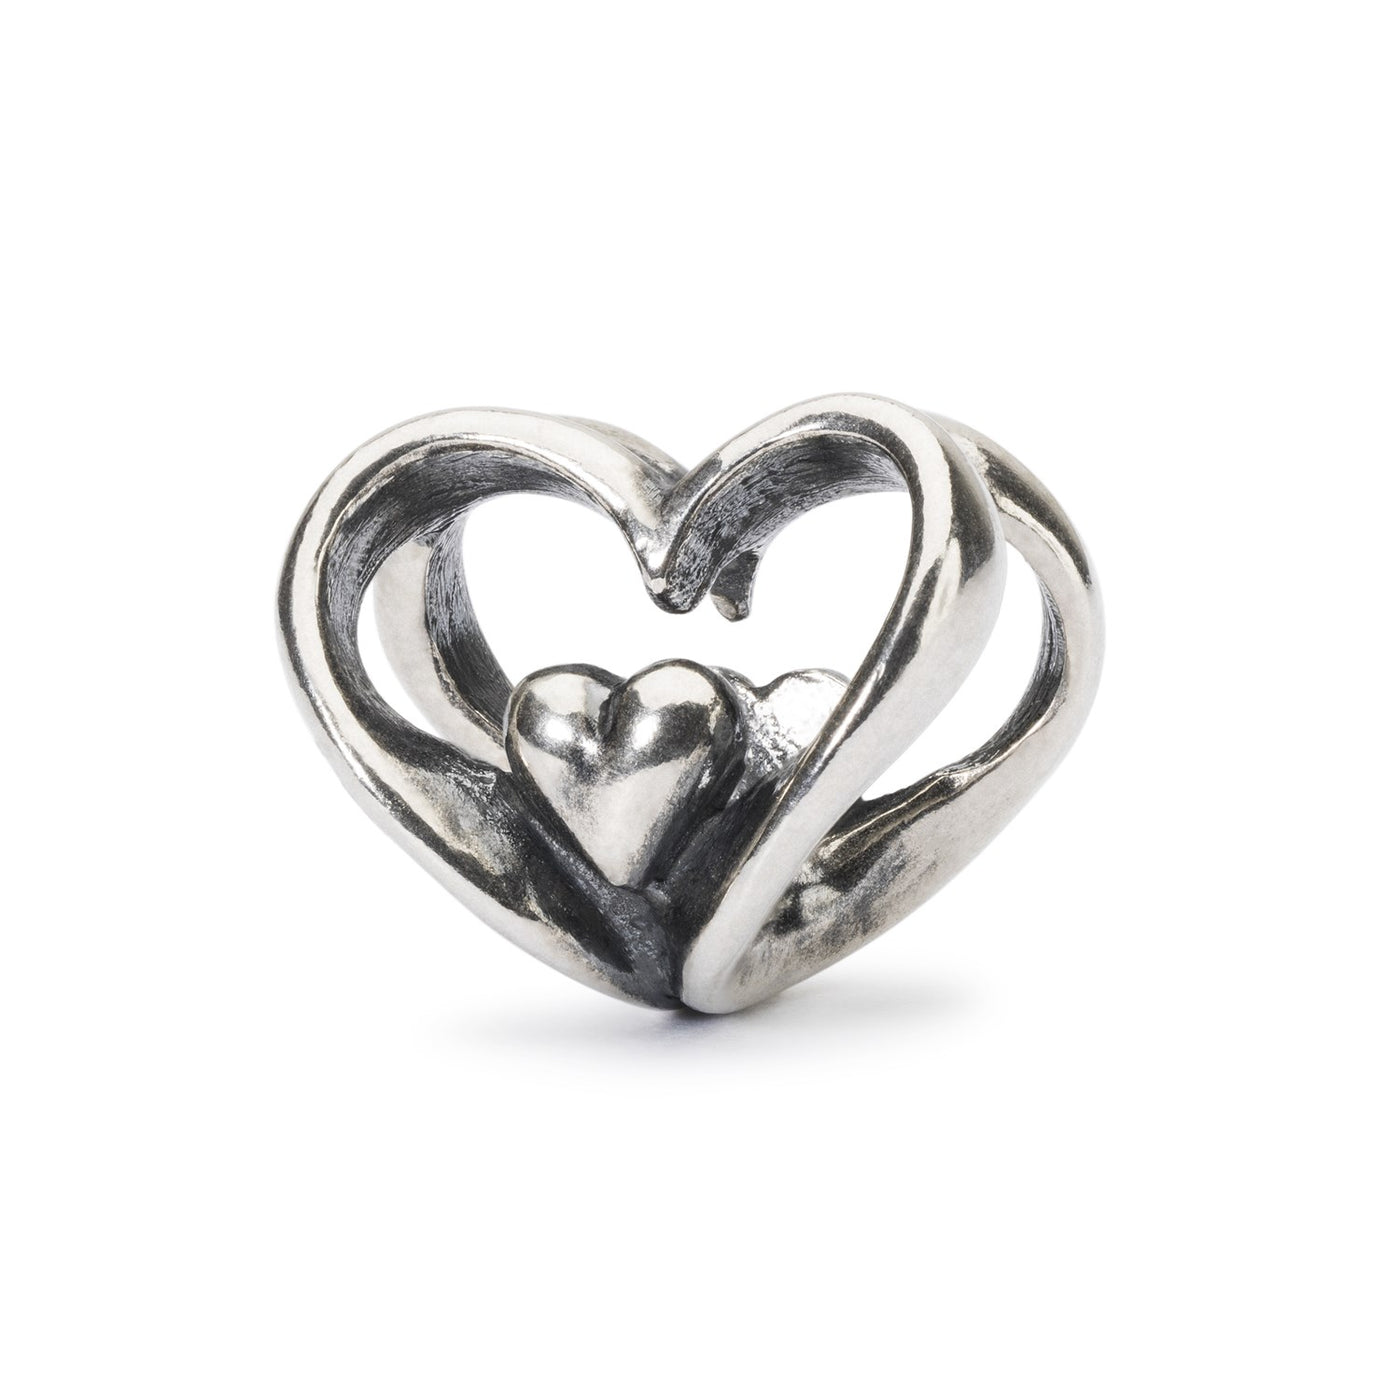 Bead entirely made of silver with two interlocking hearts design that have smaller hearts inside. Symbolizing love and connection.